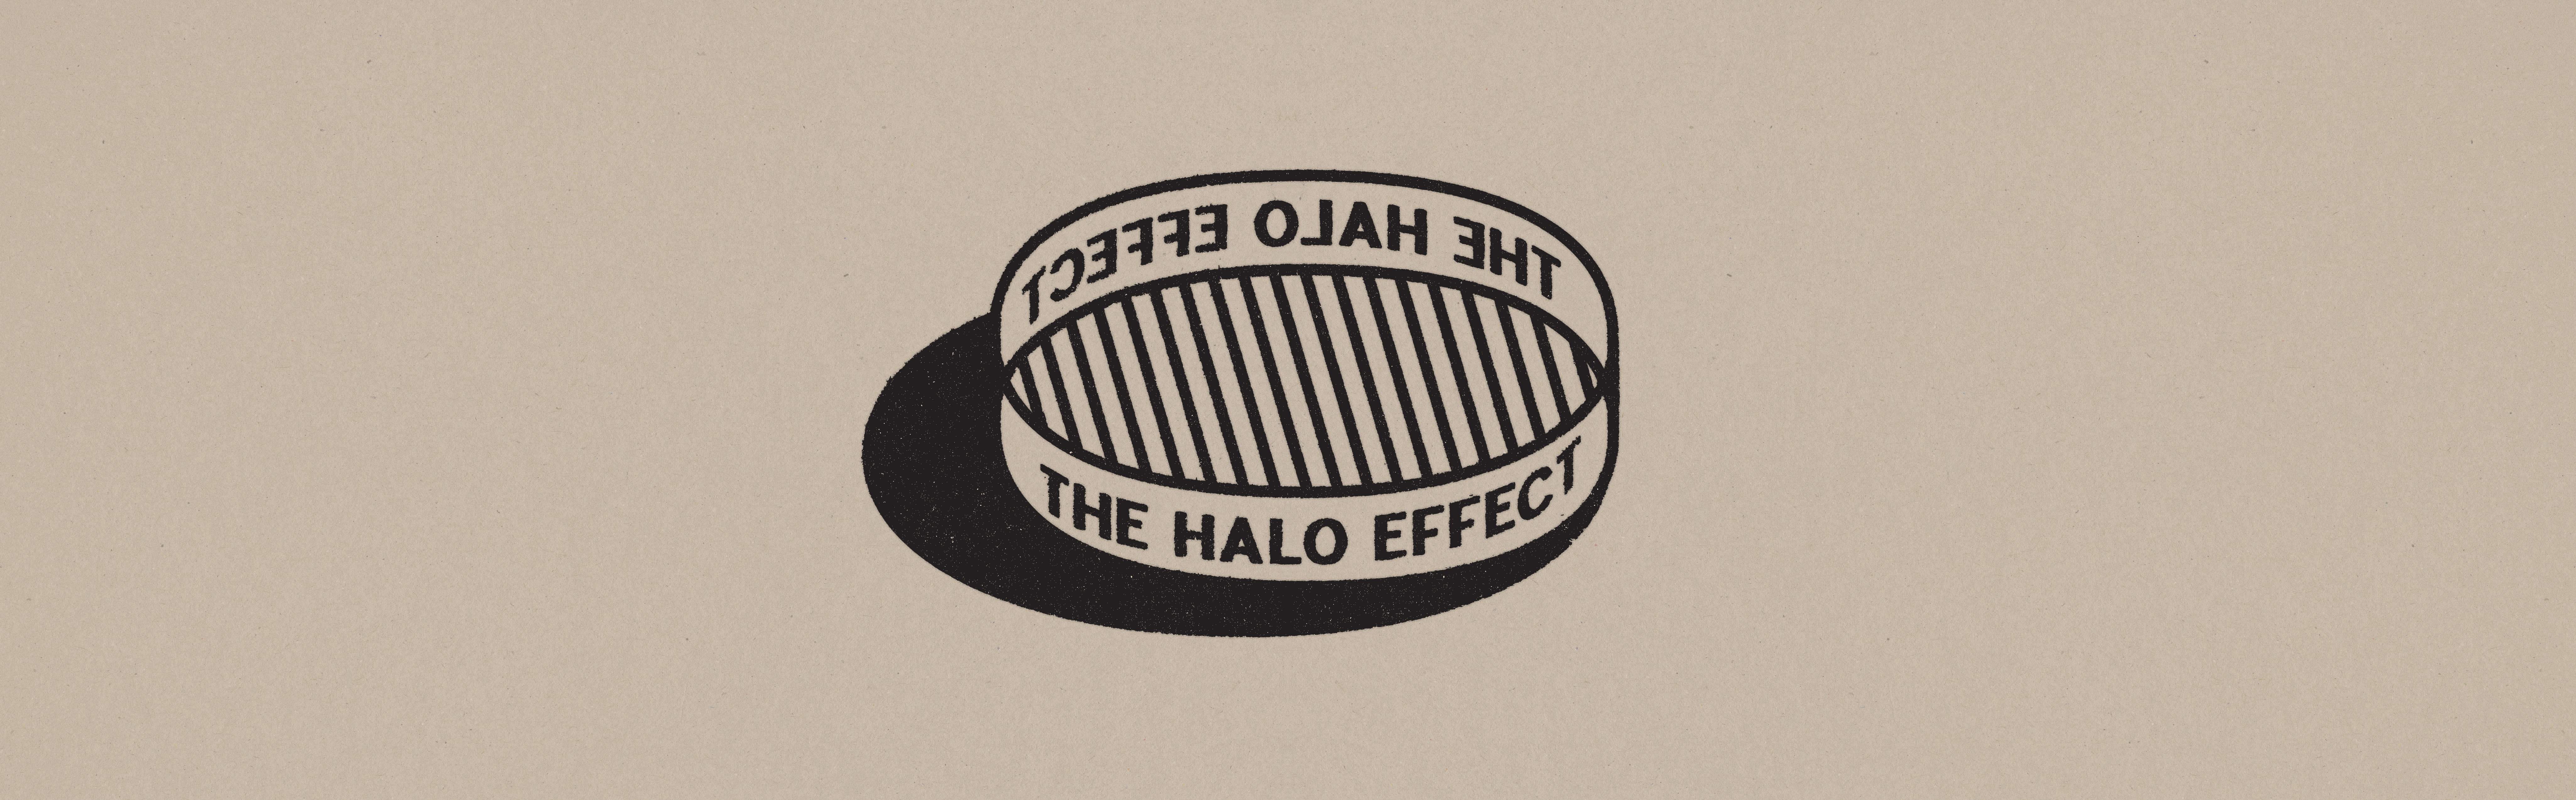 The Halo Effect in Branding: How First Impressions Impact Brands